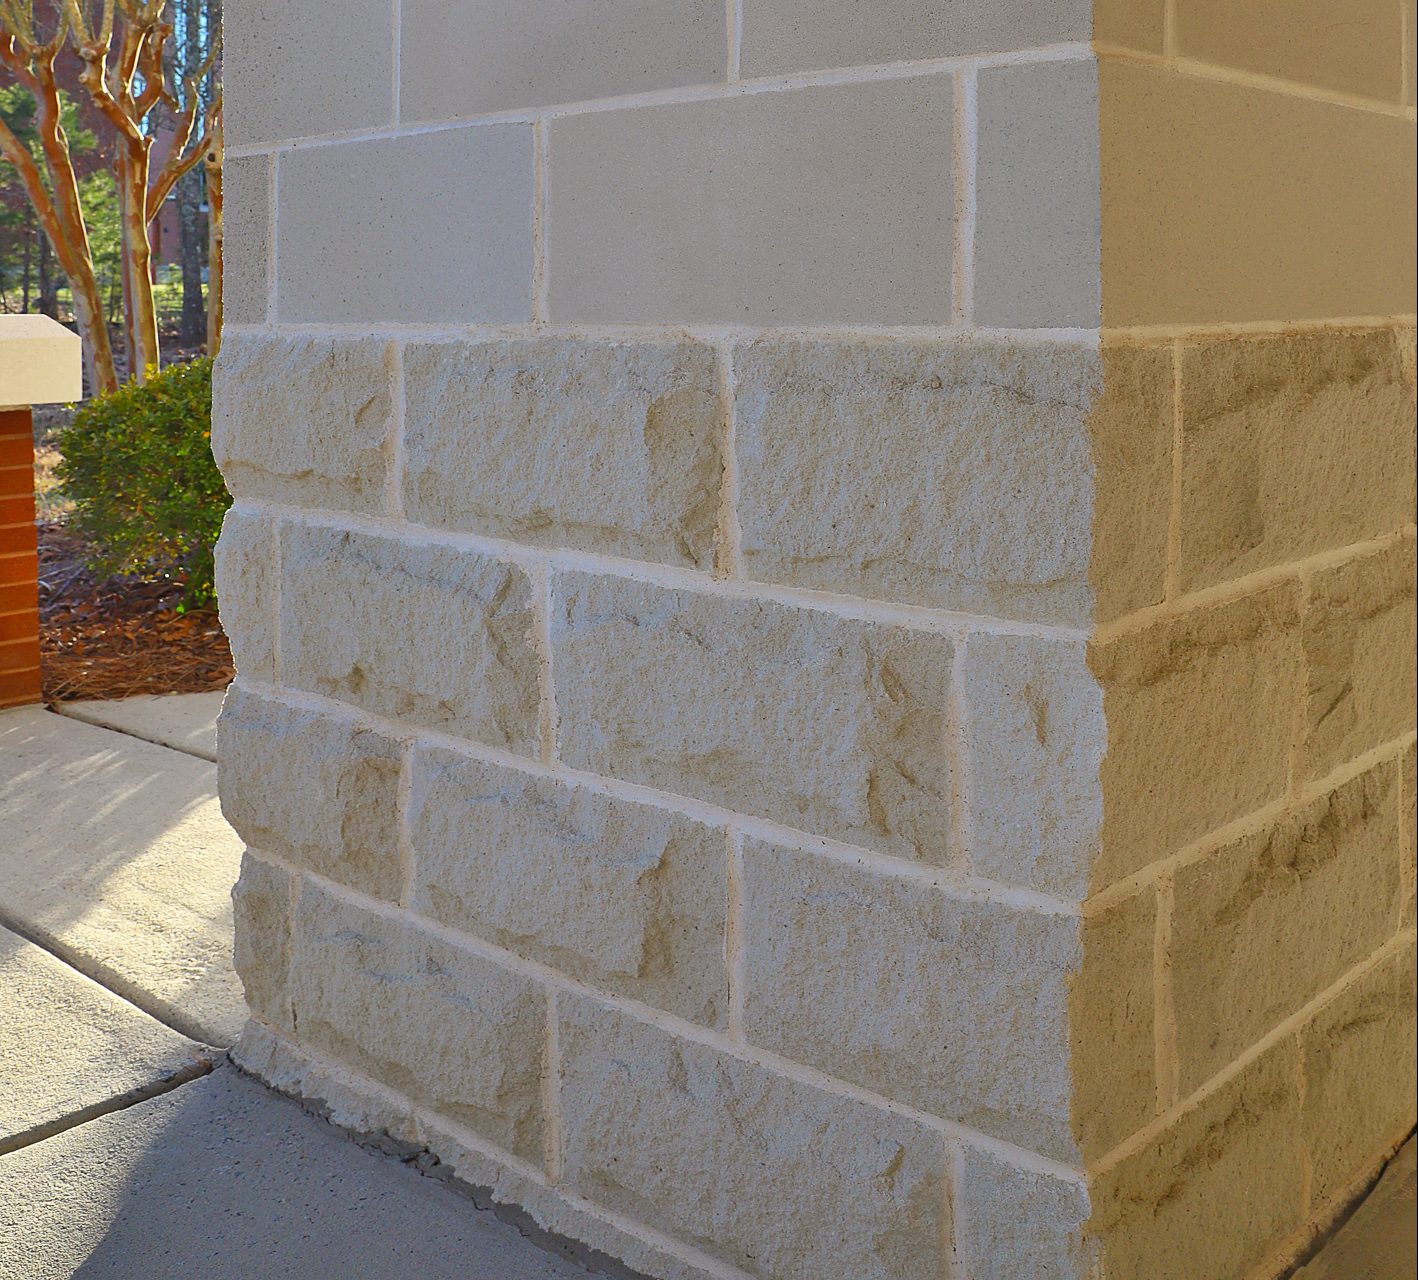 South Piedmont Community College in Monroe, NC featuring Prestige Cast Stone - Chiseled Face in Talc